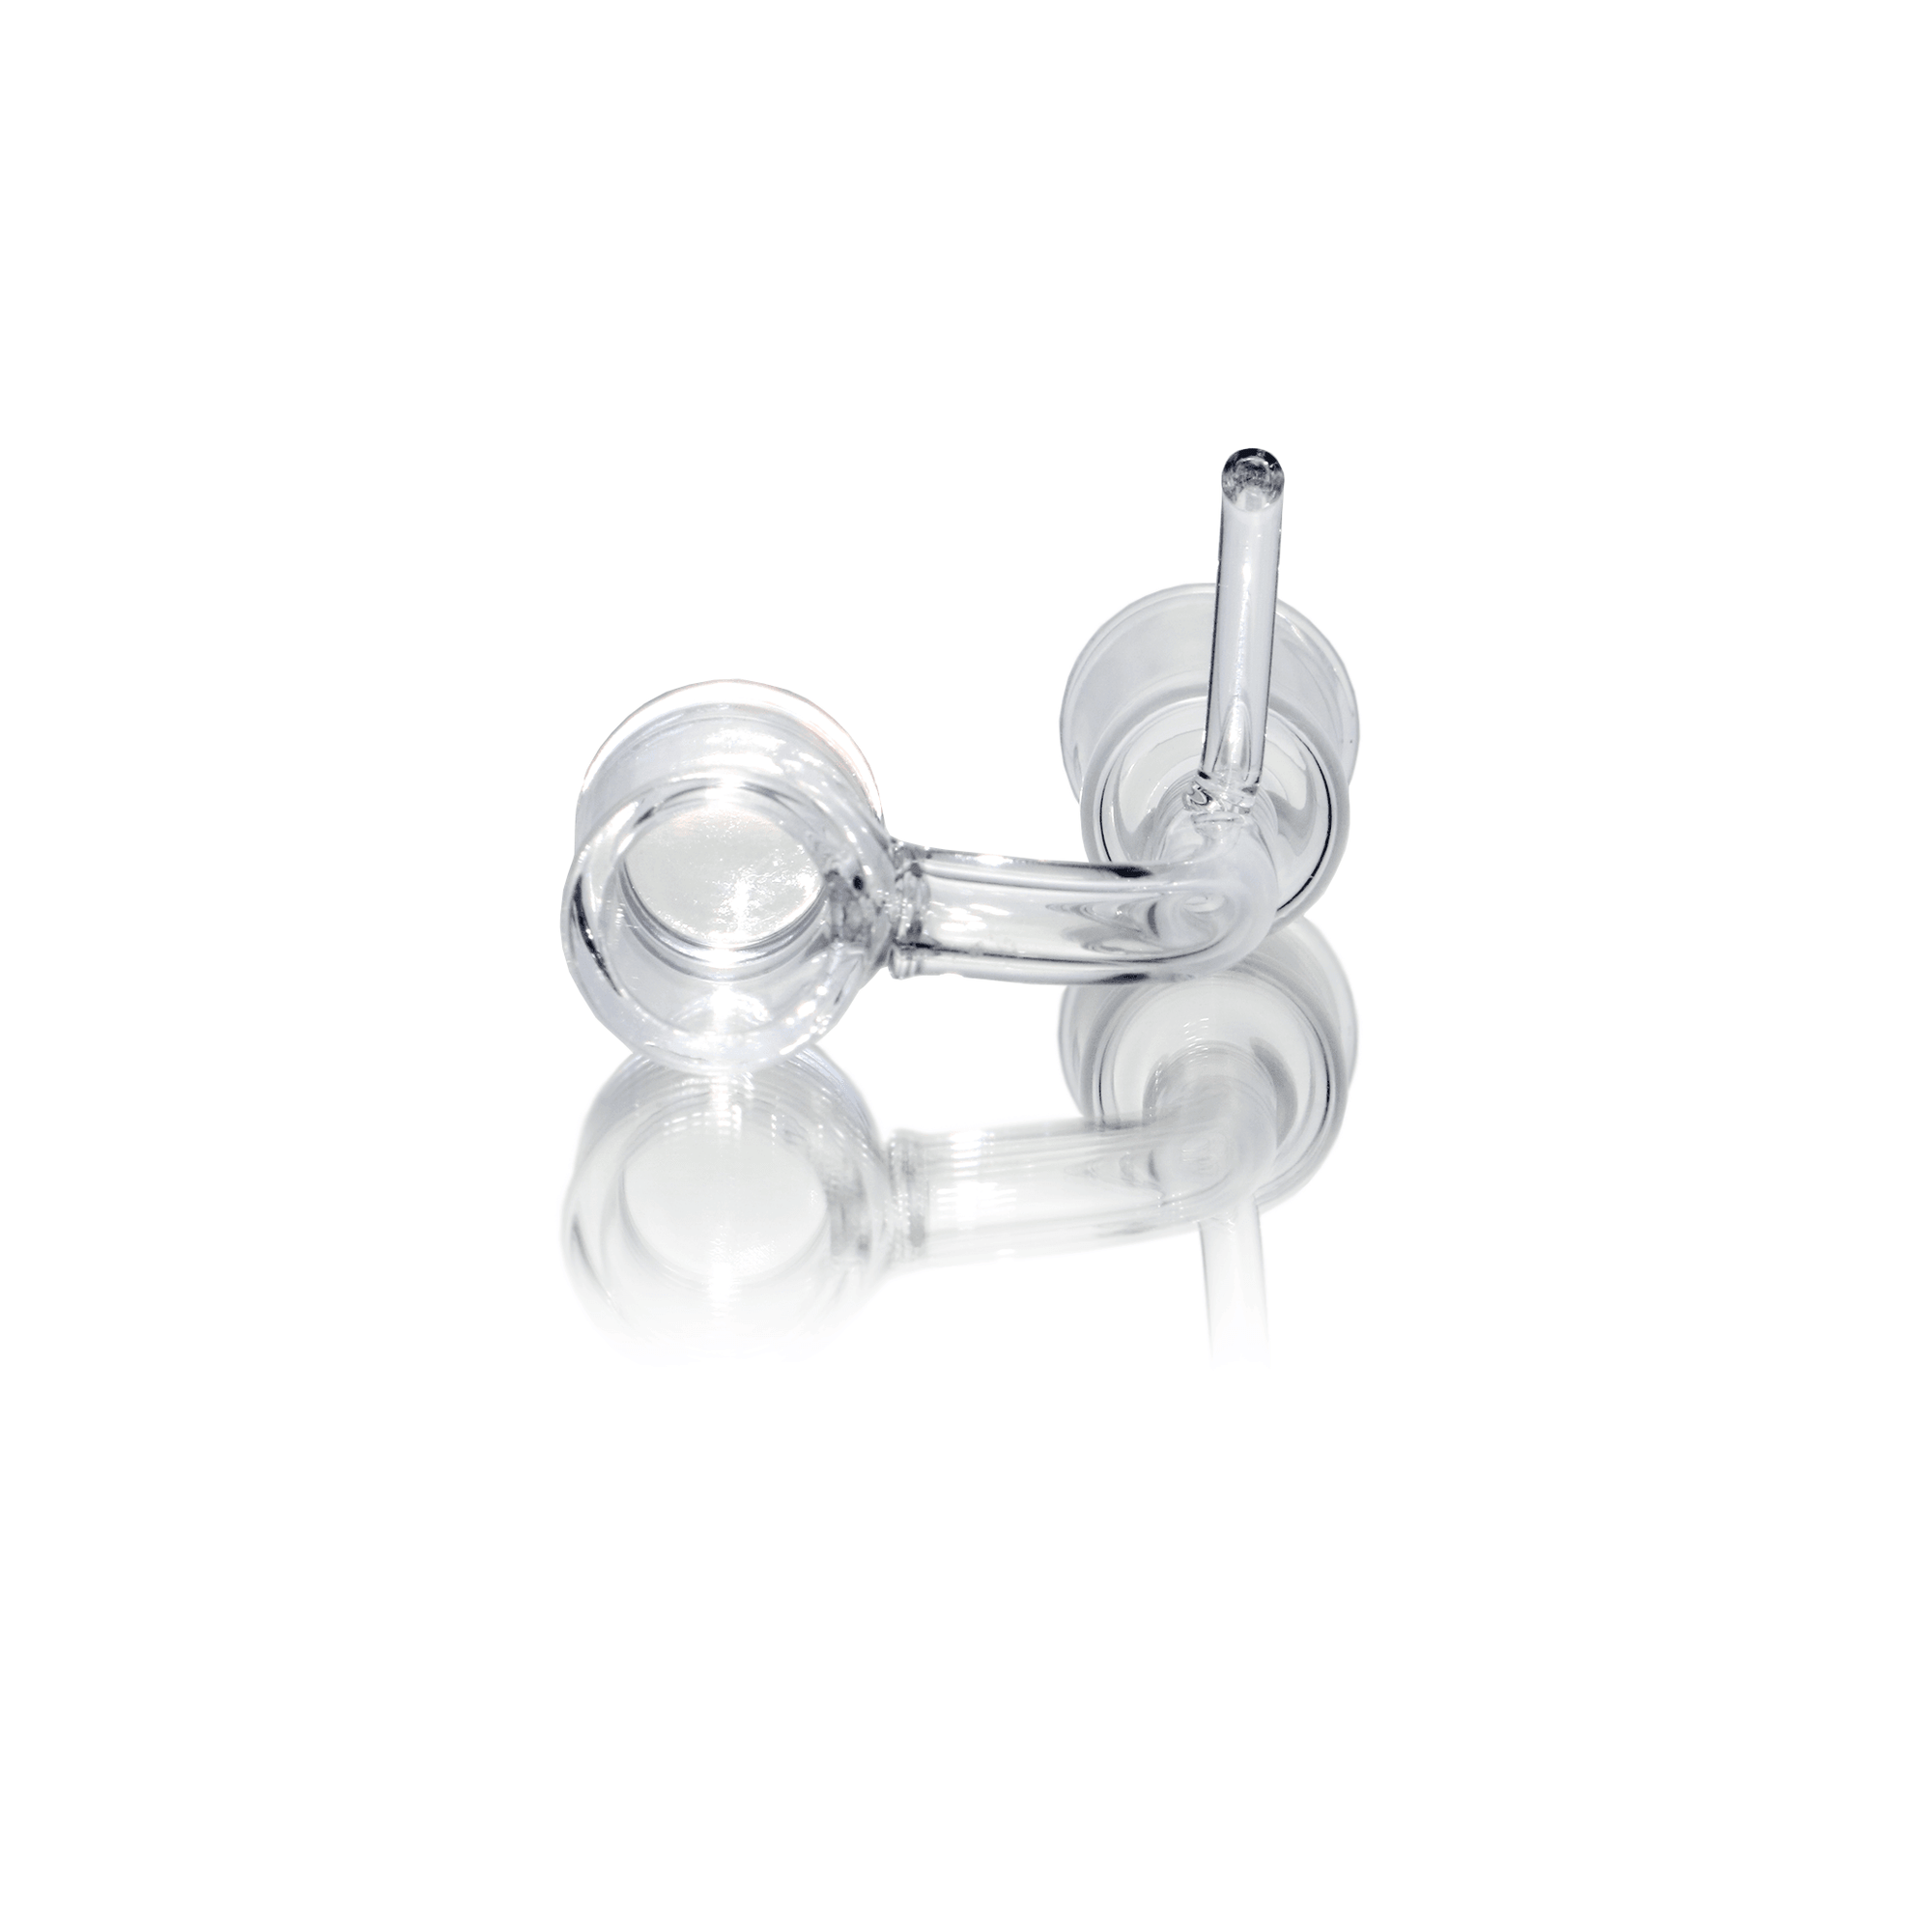 14mm Female Quartz E-Banger for 20mm Coil With Saucer Cap | Prone View | the dabbing specialists